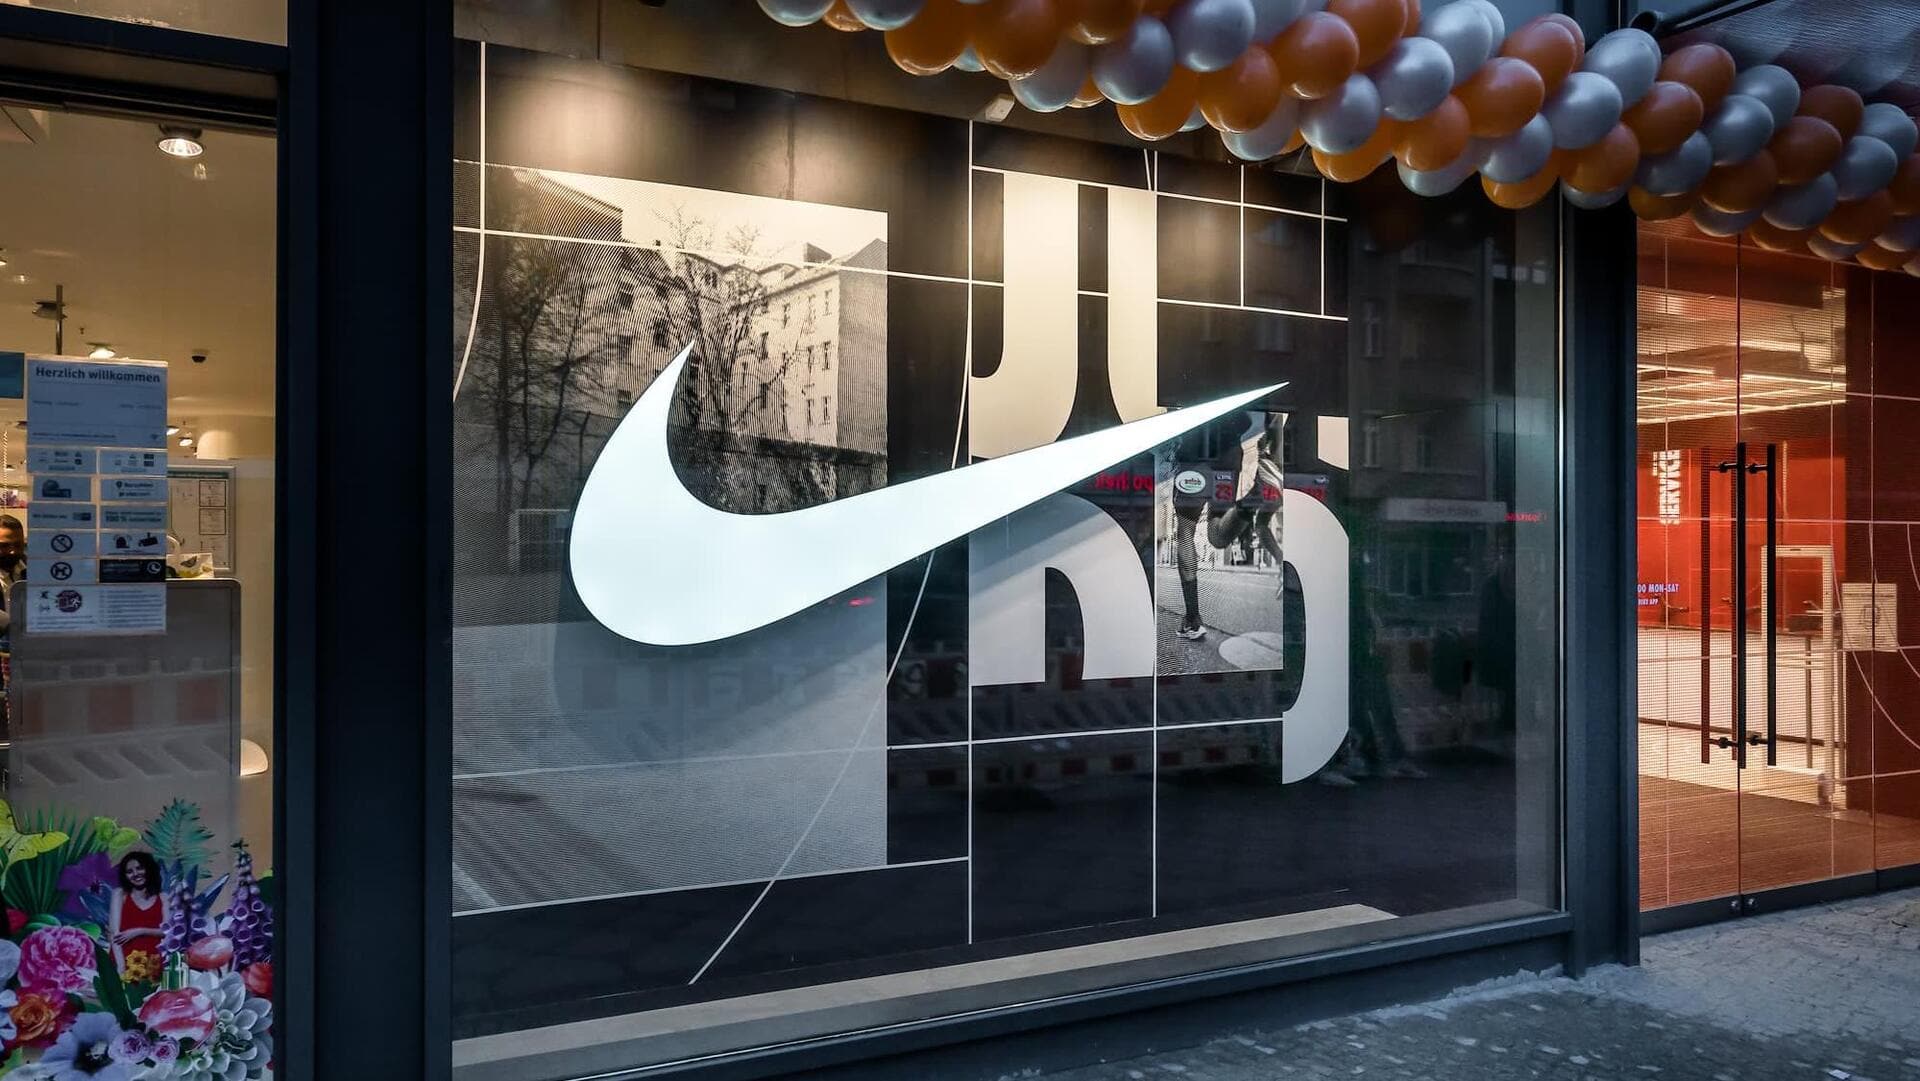 Nike agreement ends Adidas's 70-year relationship with German football teams